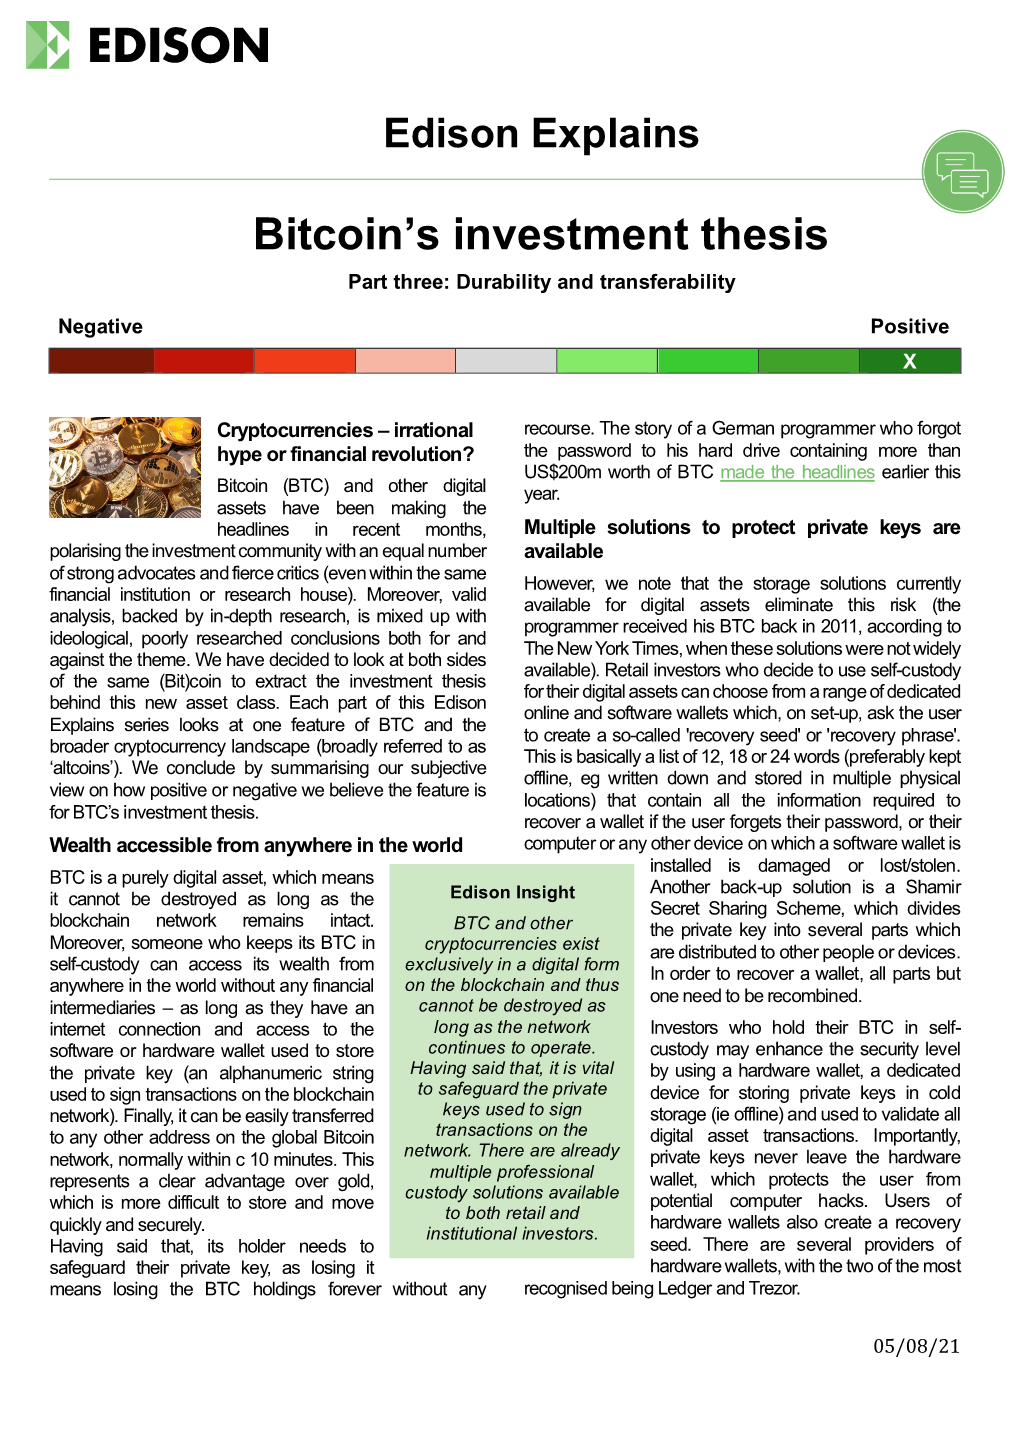 Bitcoin's Investment Thesis